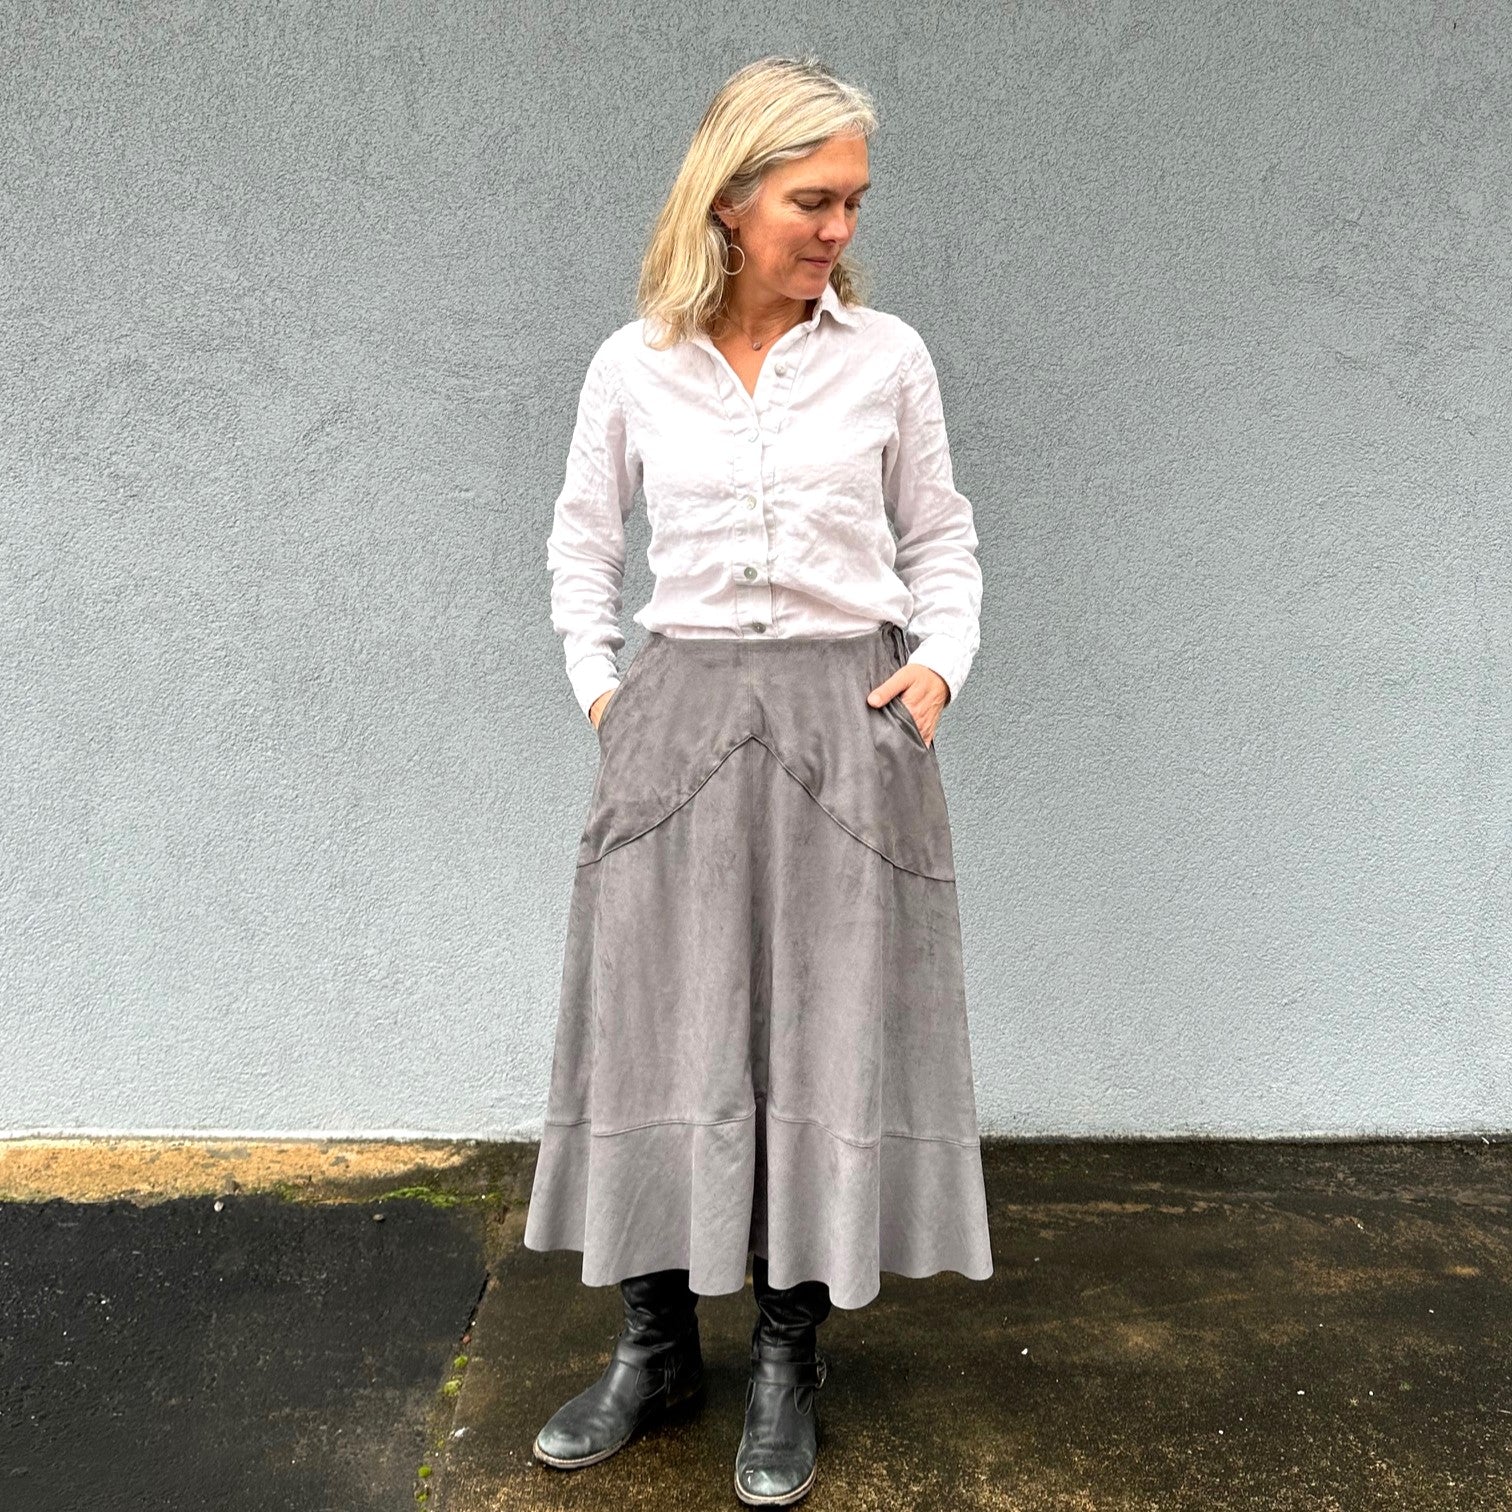 My Grey Ultrasuede Version of the Cowgirl Skirt